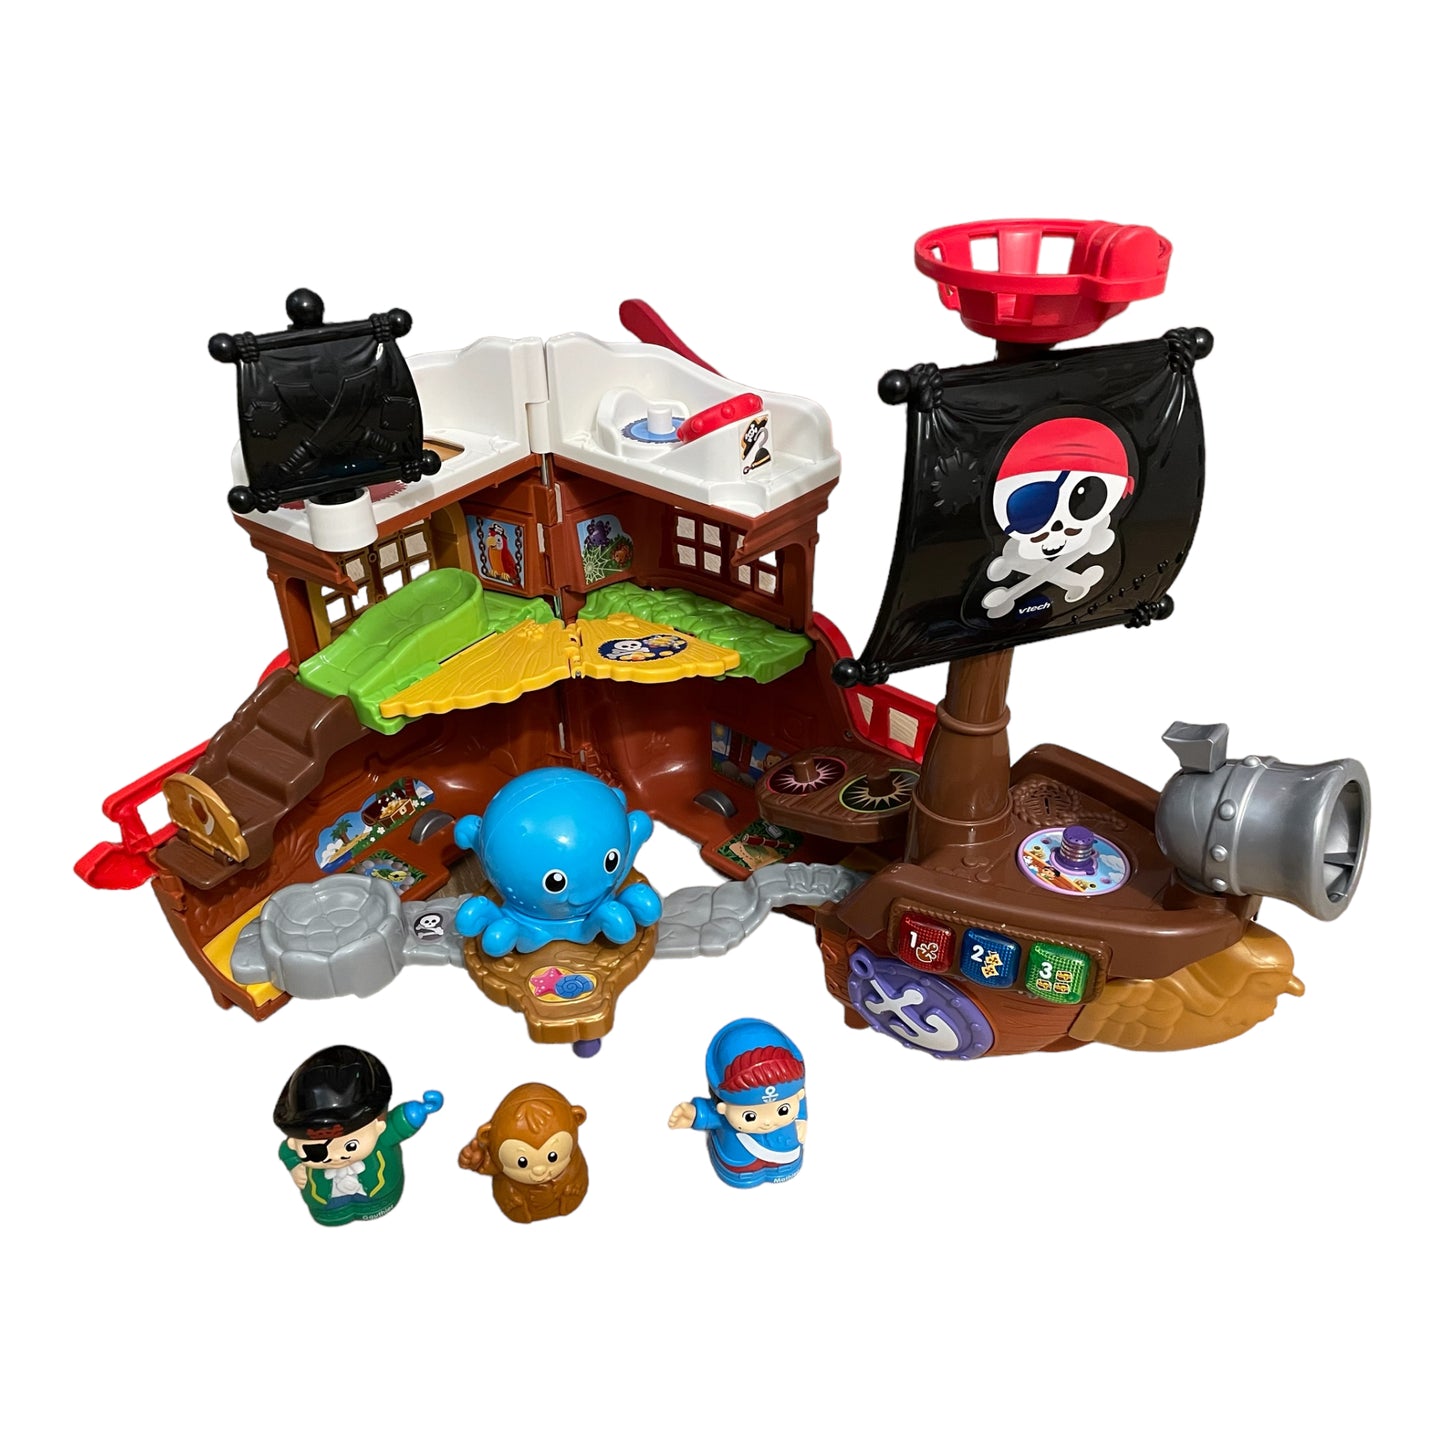 VTech - Toot Friends Kingdom Pirate Ship Toy